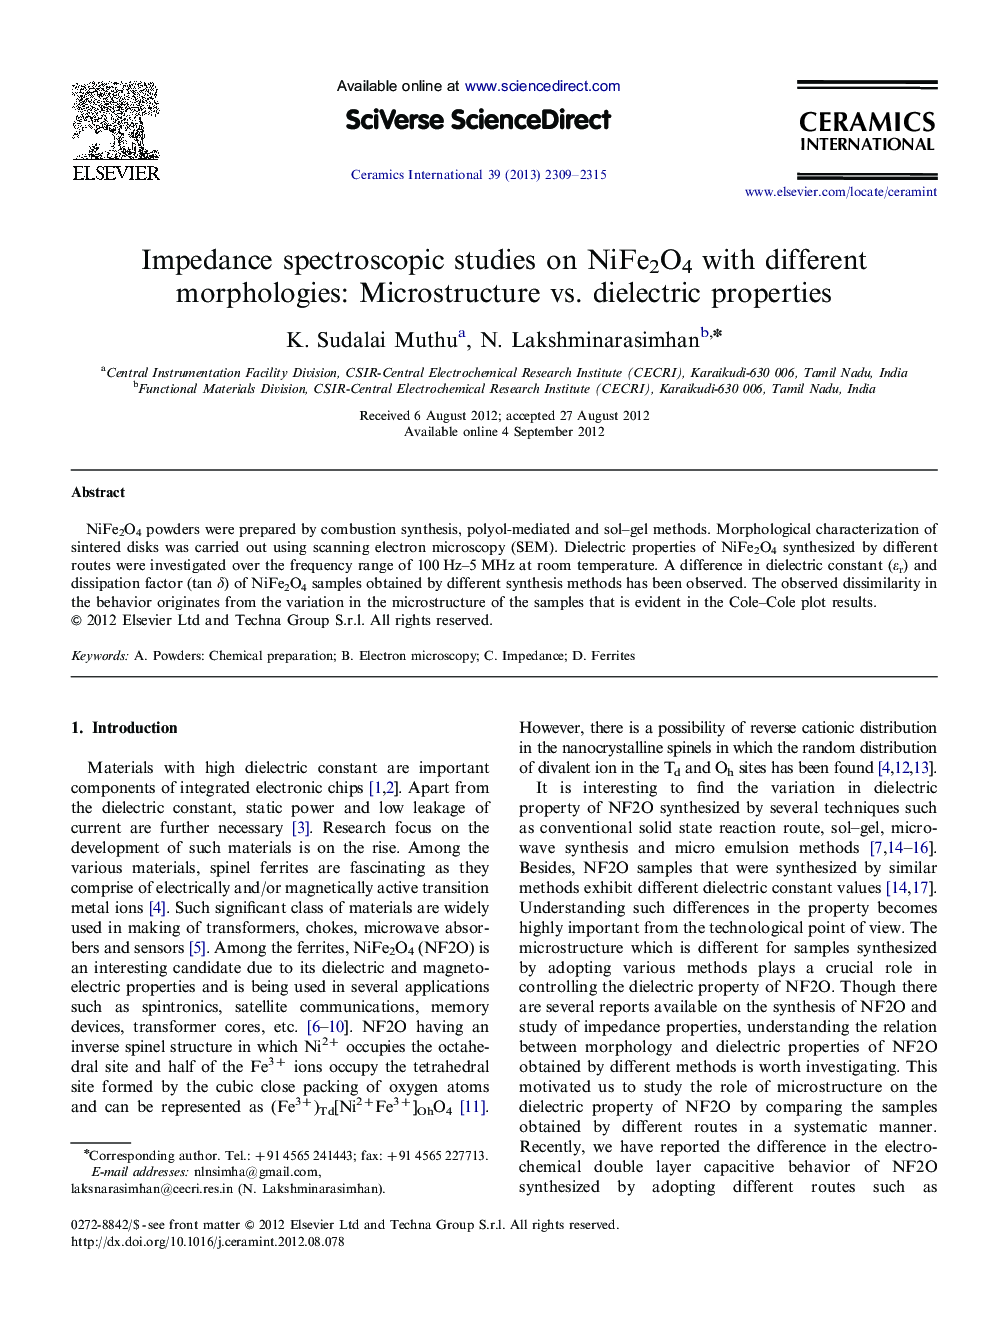 Impedance spectroscopic studies on NiFe2O4 with different morphologies: Microstructure vs. dielectric properties